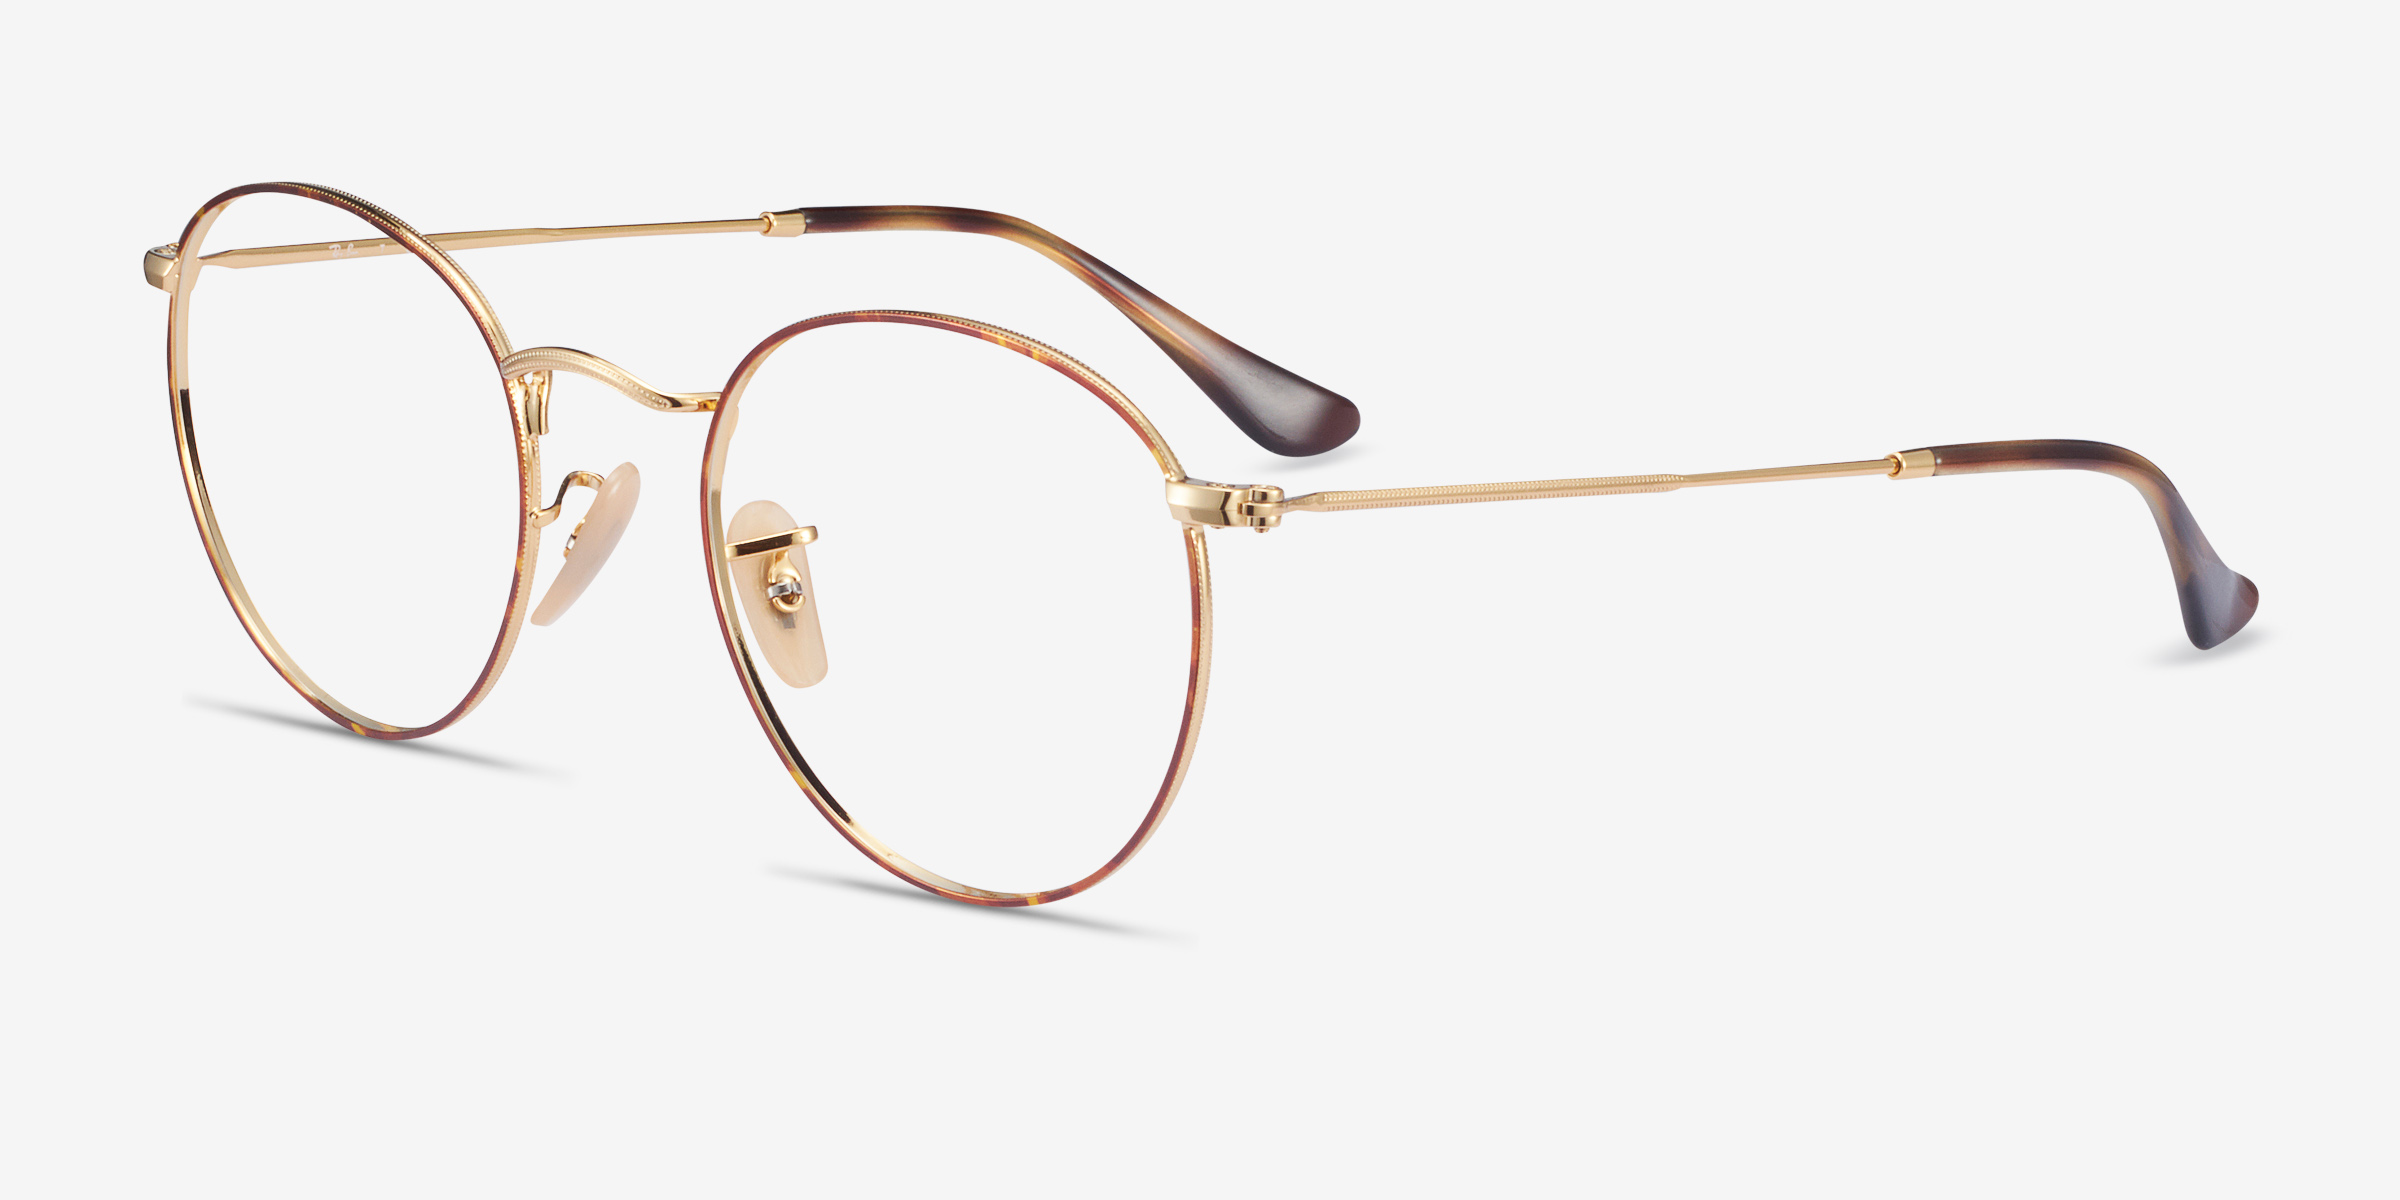 Ray Ban Rb3447v Round Rond Tortoise And Gold Monture Lunettes De Vue Eyebuydirect Canada